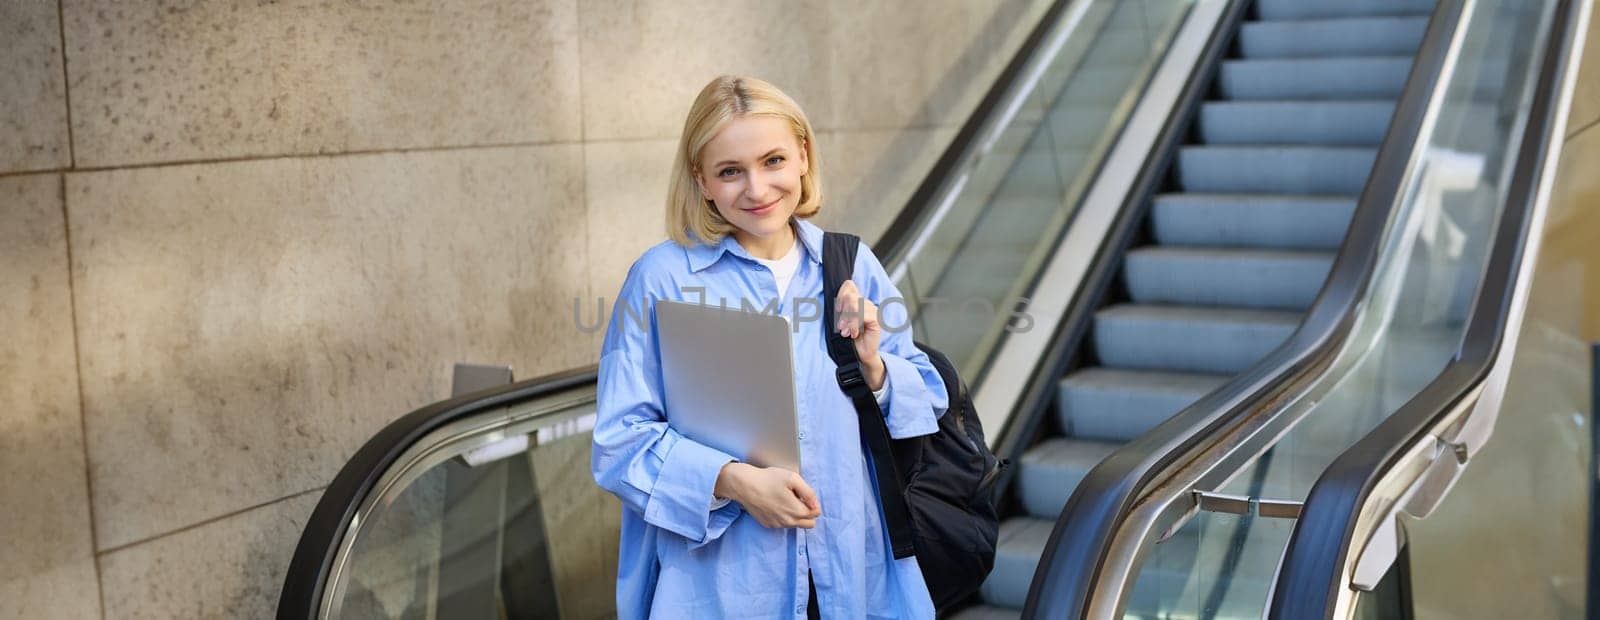 Education and people concept. Young woman with laptop and backpack, using escalator in city centre, smiling and looking at camera.